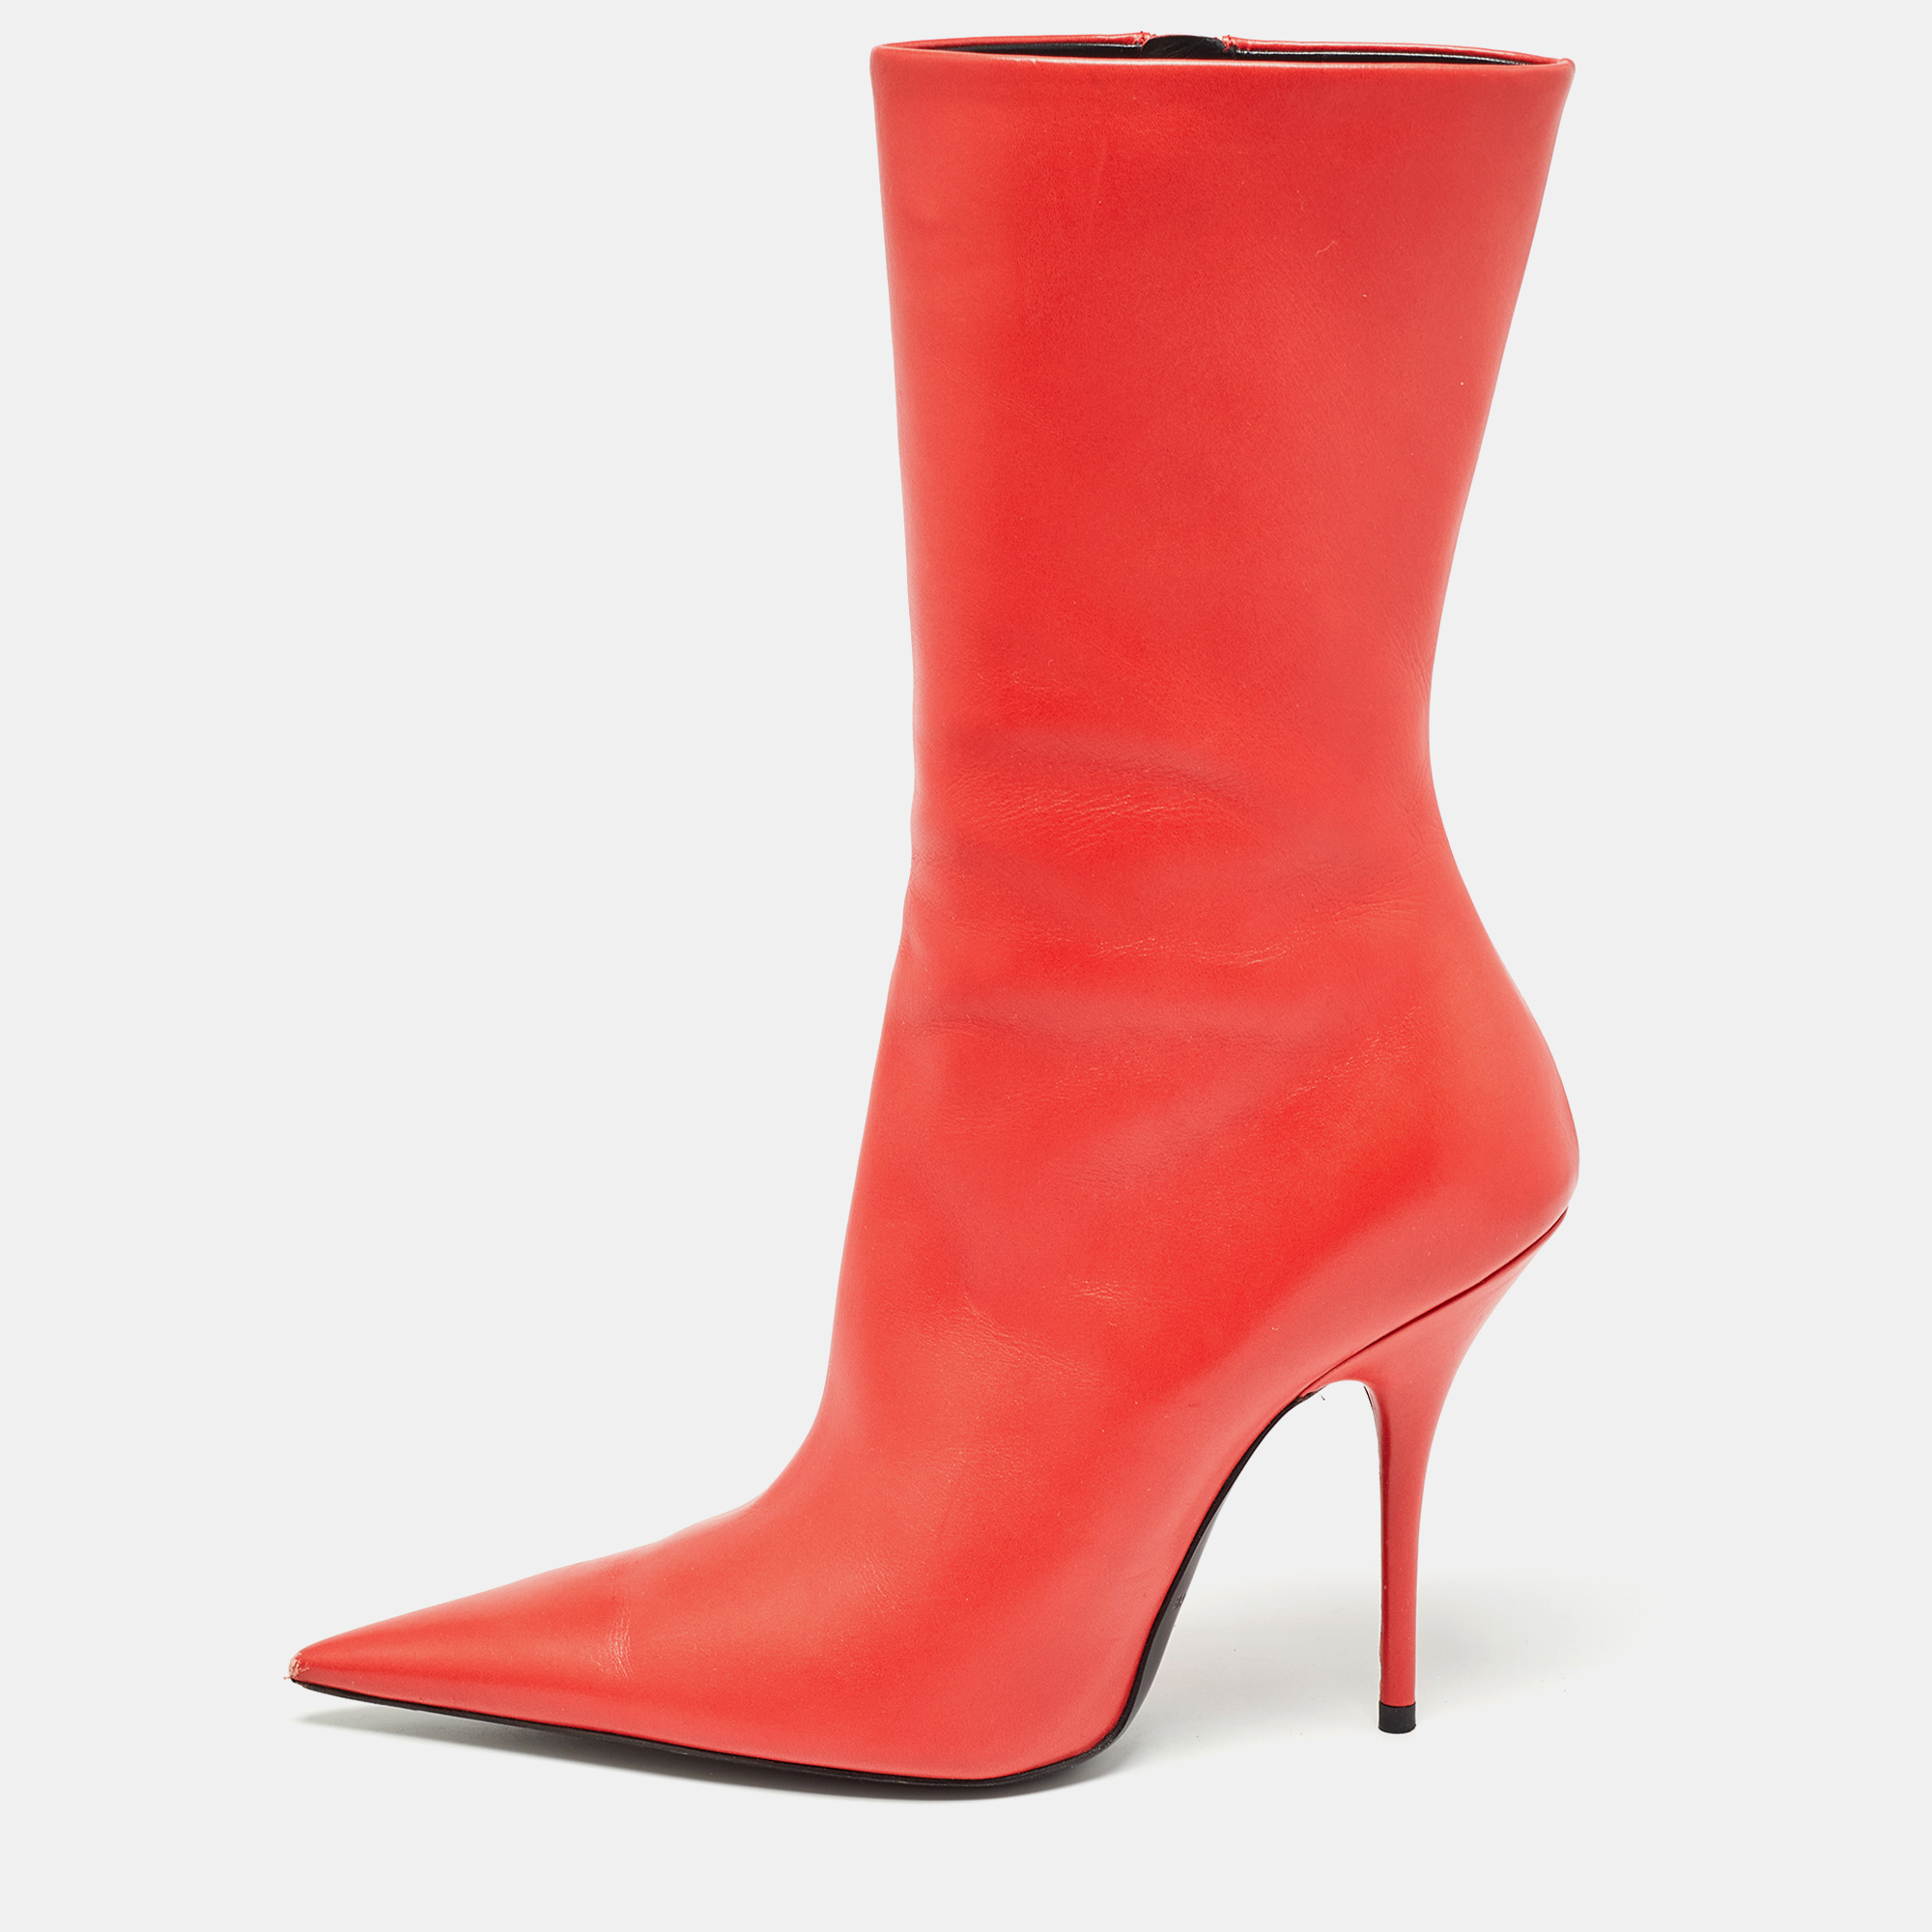 Balenciaga red leather knife midcalf boots size 39